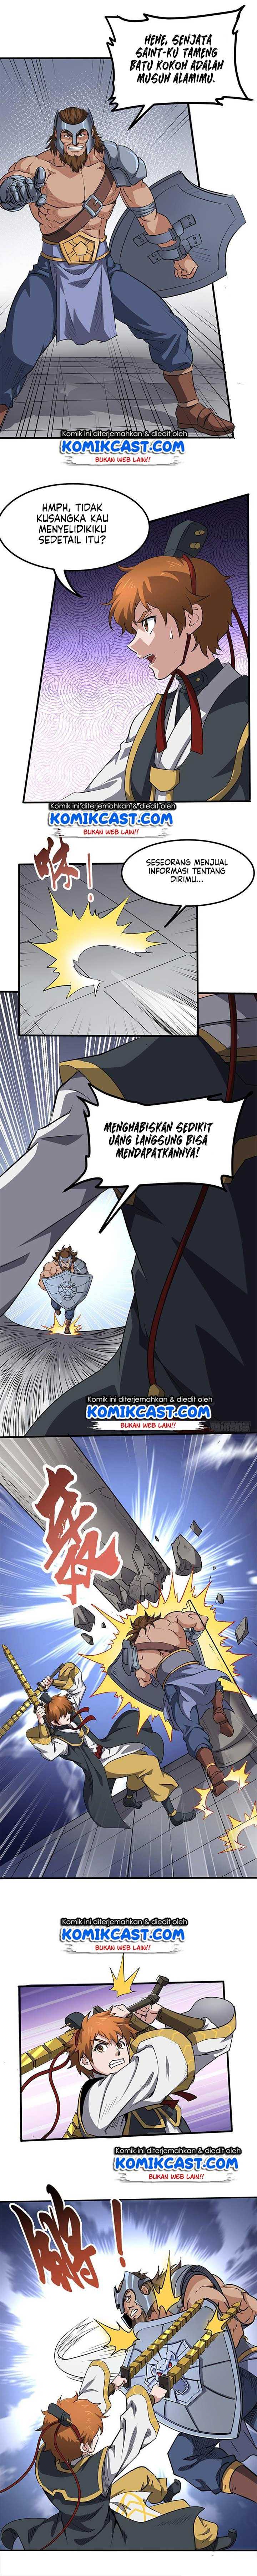 Chaotic Sword God Chapter 159